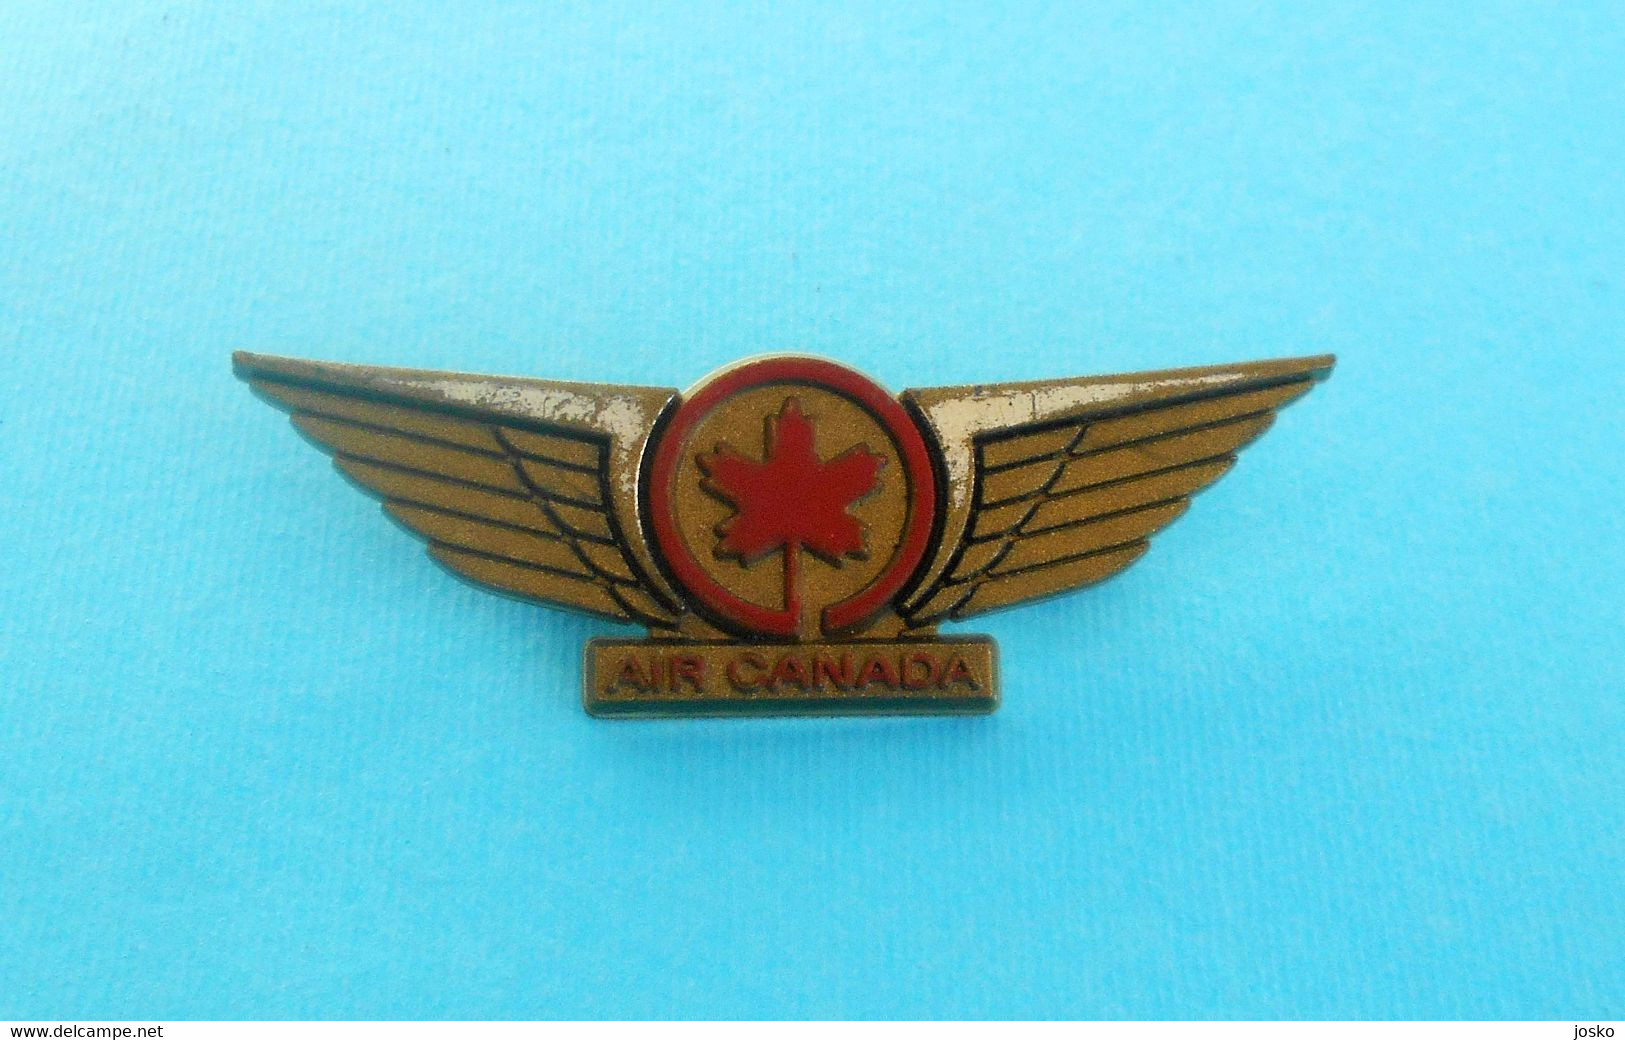 AIR CANADA ... Vintage Pilot Wings Badge * Canada National Airlines * Airways Airline Air Company Pilote Plane Avion - Crew Badges